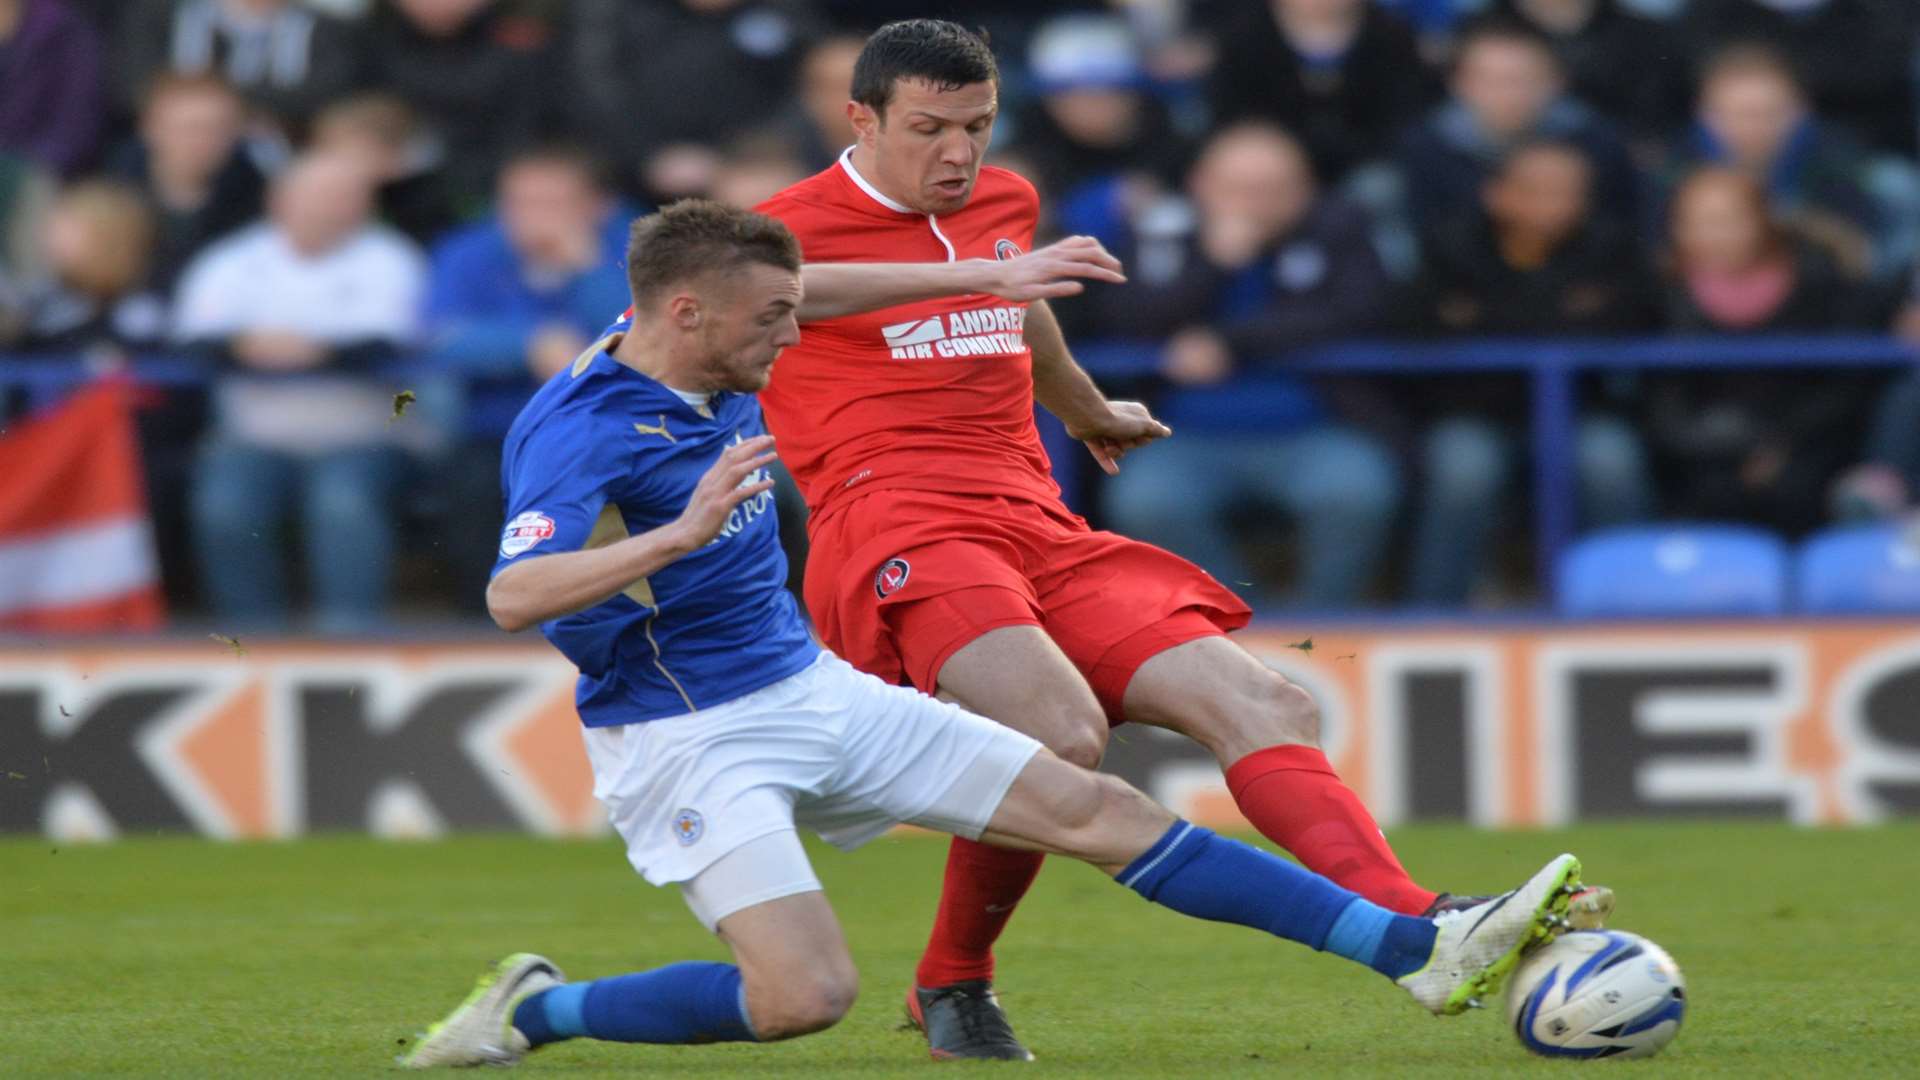 Charlton Athletic defender Richard Wood was up for the challenge against Leicester, but the Addicks suffered a disappointing defeat. Picture: Keith Gillard